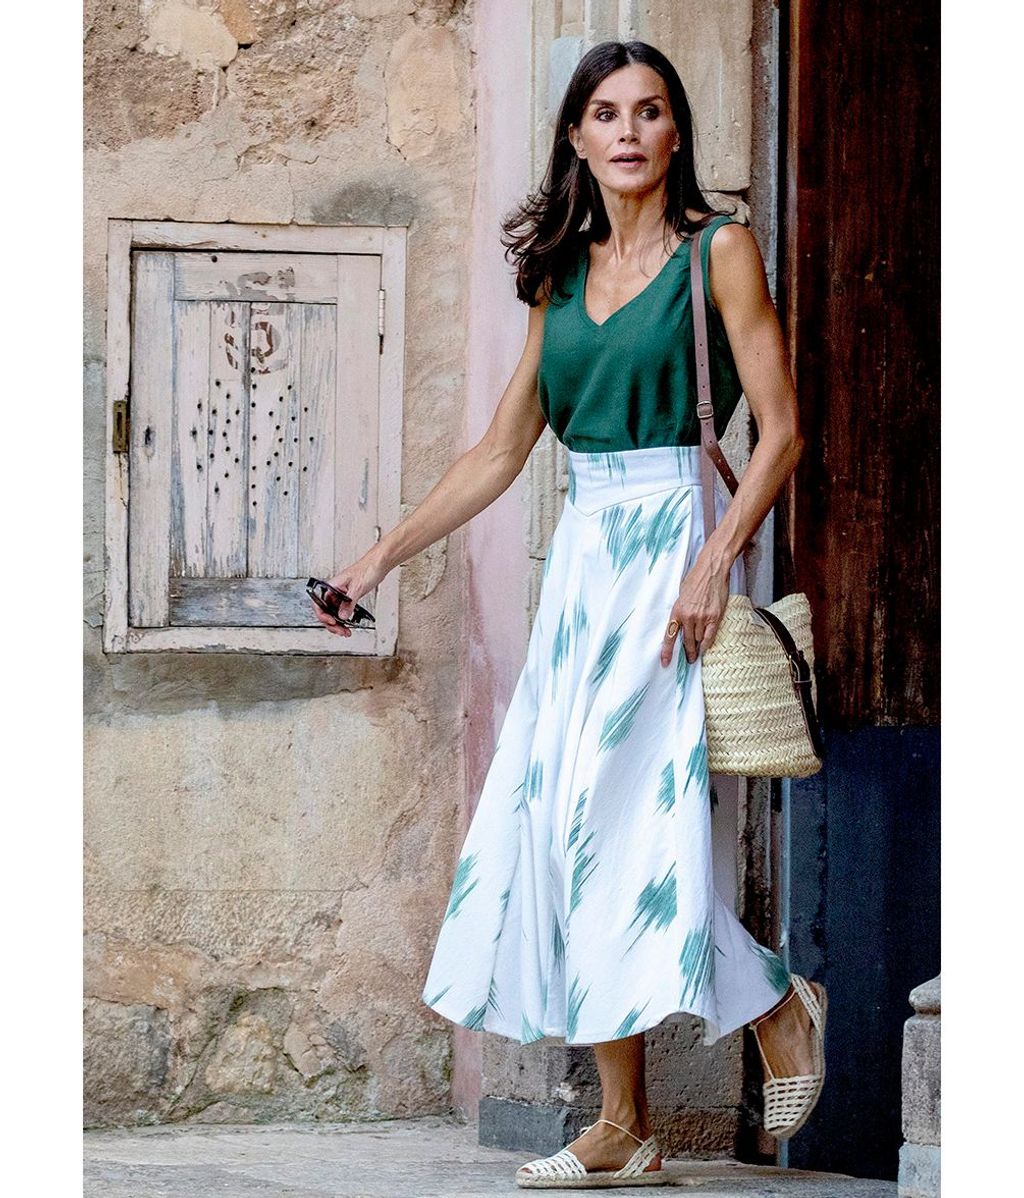 Queen Letizia of Spain at la Cartuja de Valldemossa, on August 01, 2022, posing for the press during their holidays
It is a former monastery of the Carthusian Order in Valldemossa, It now serves as a museum
Photo: Albert Nieboer / 
Netherlands OUT / Point de Vue OUT *** Local Caption *** 39545633